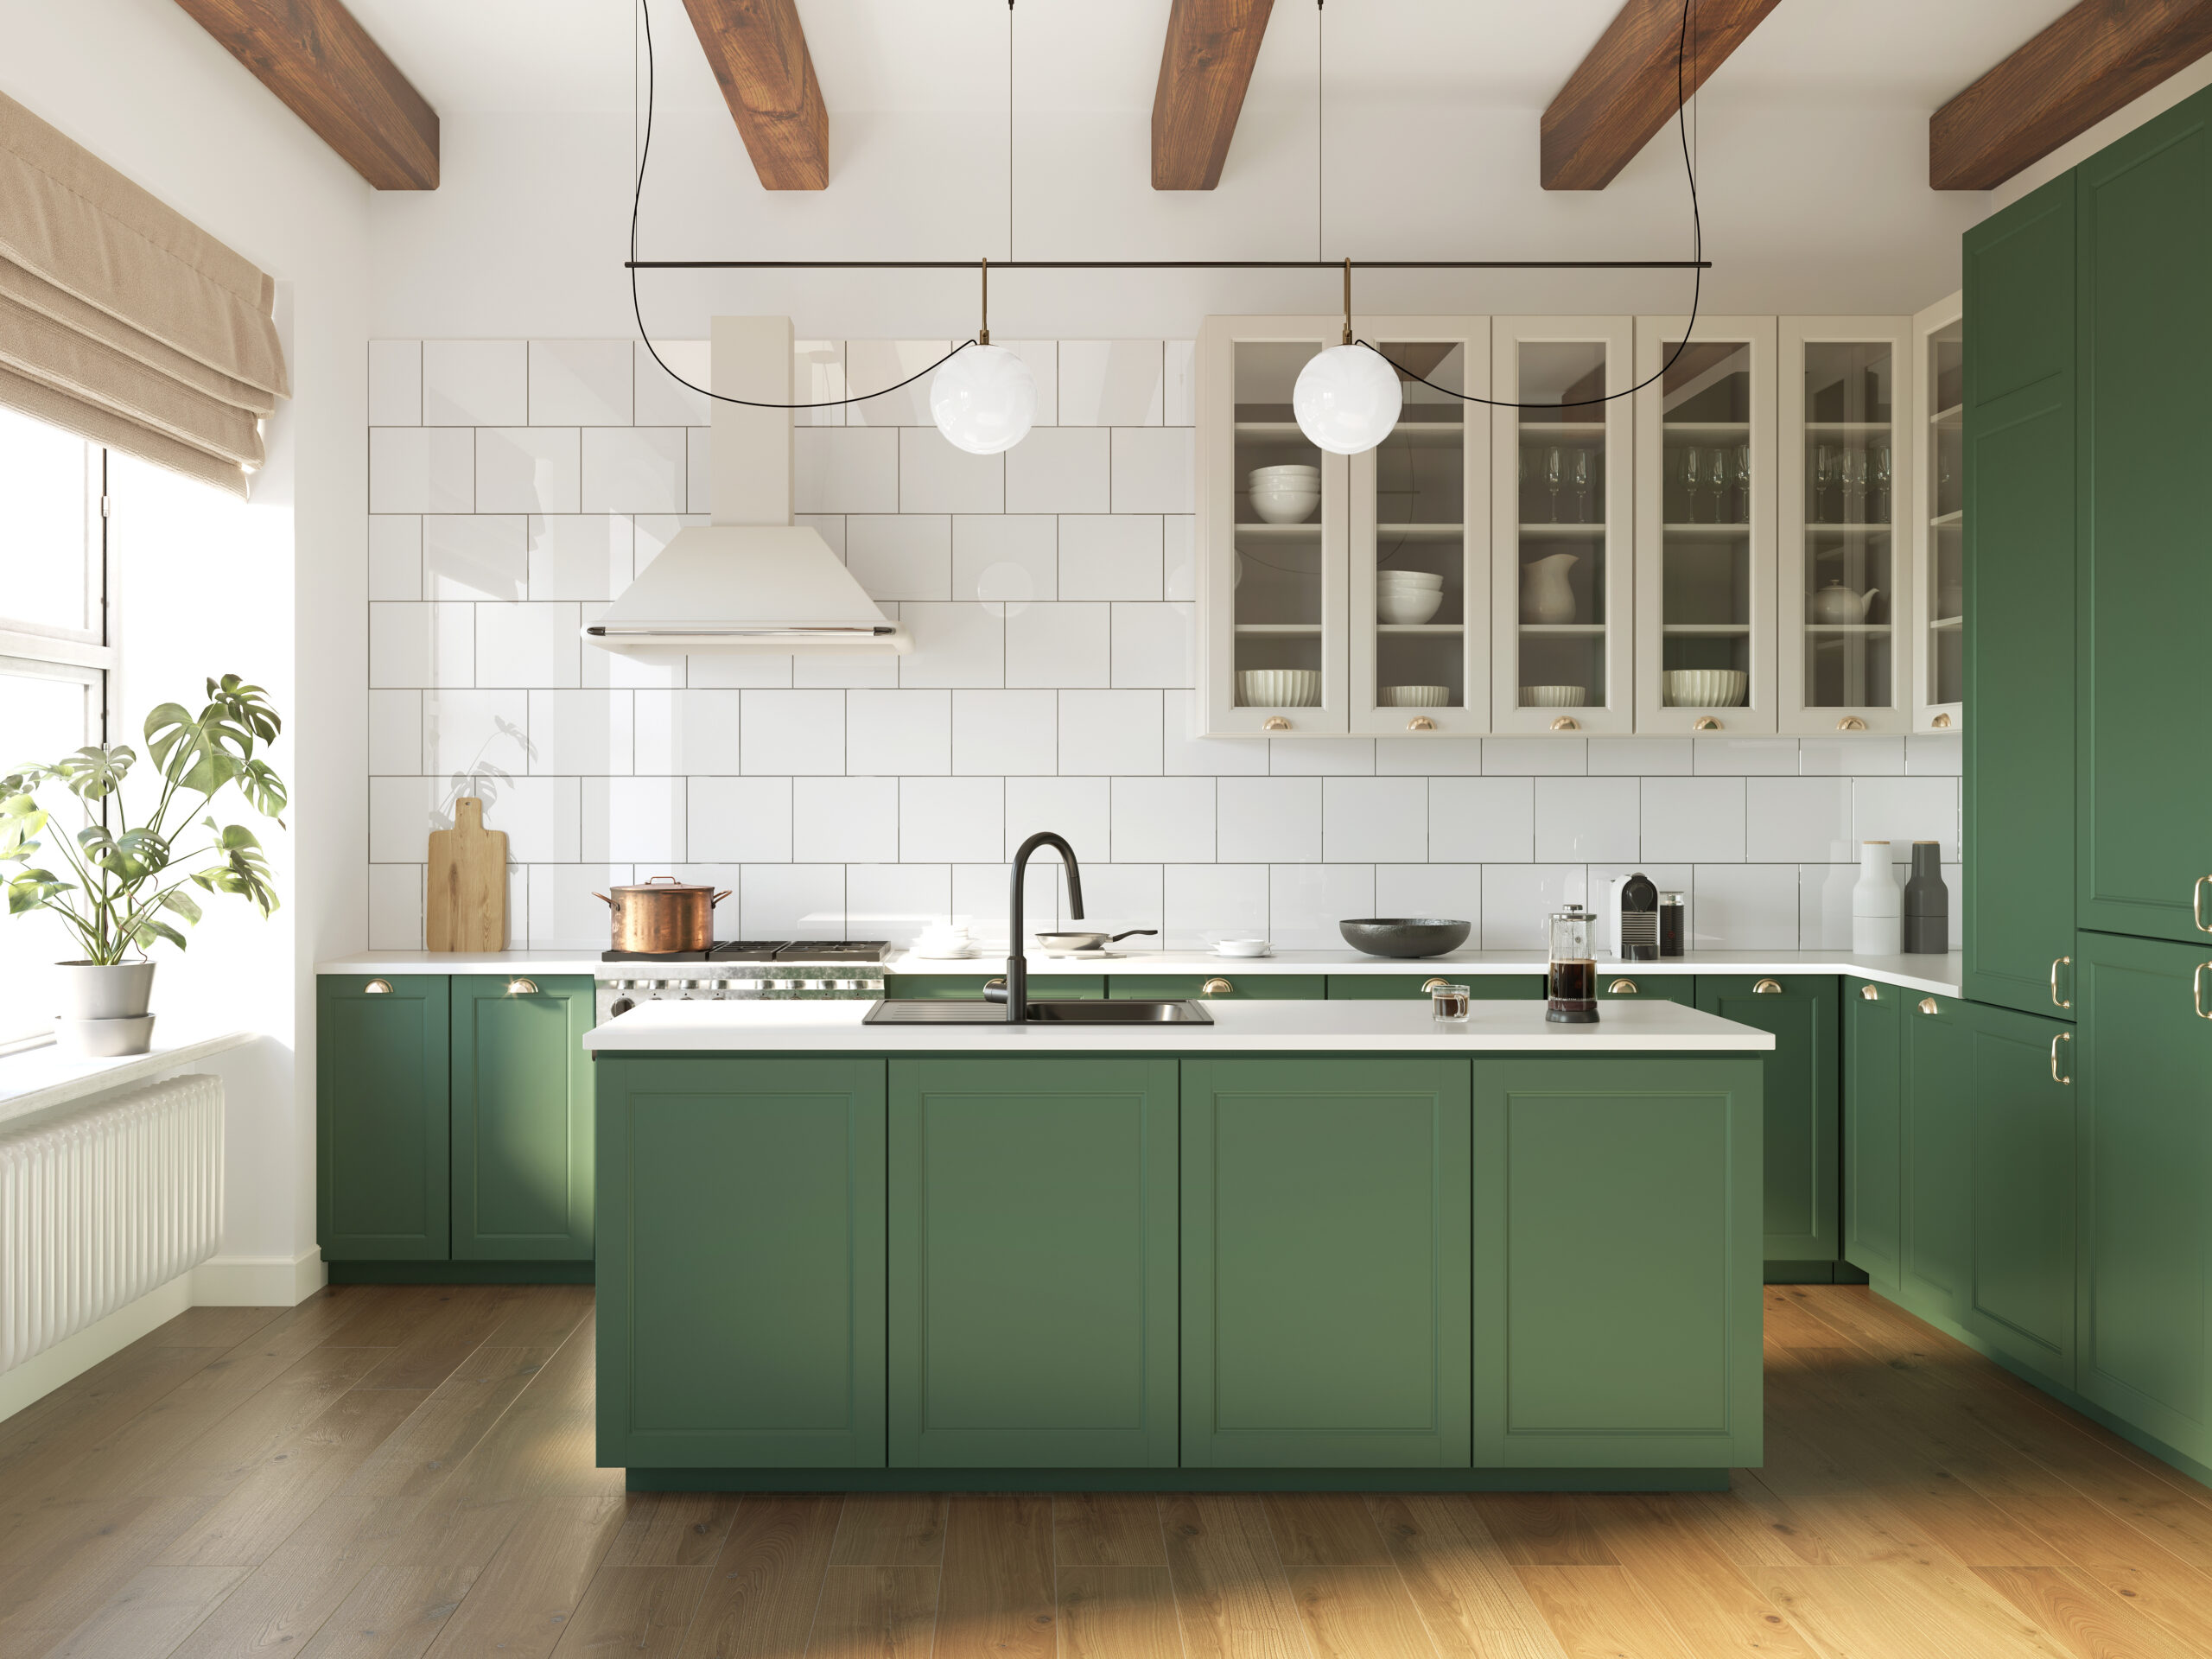 Green cabinets in rustic kitchen